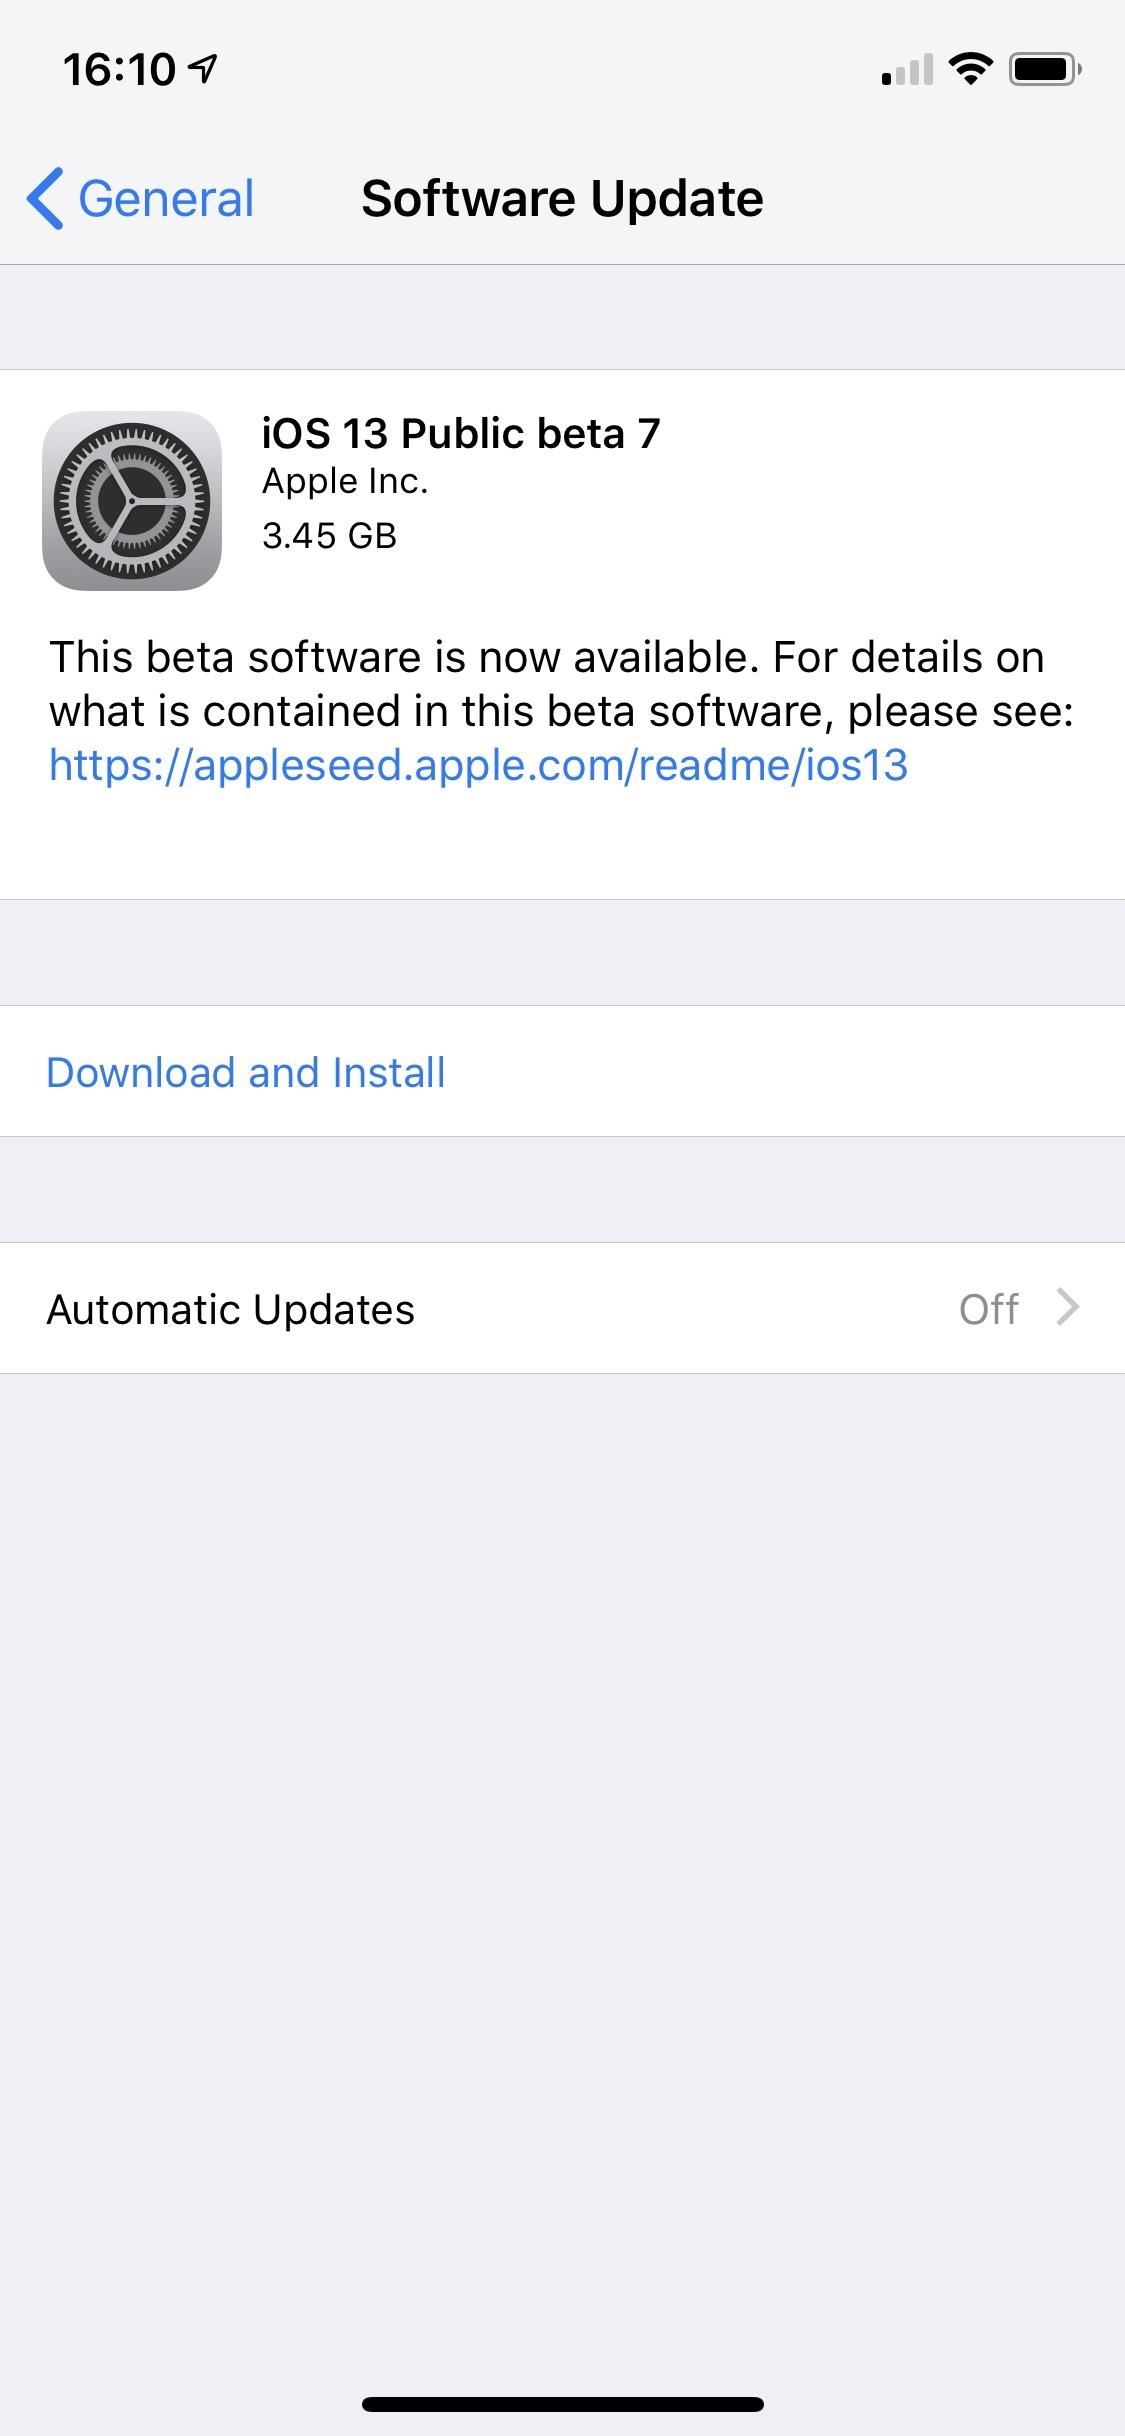 Apple Just Released iOS 13 Public Beta 7 for iPhone to Software Testers